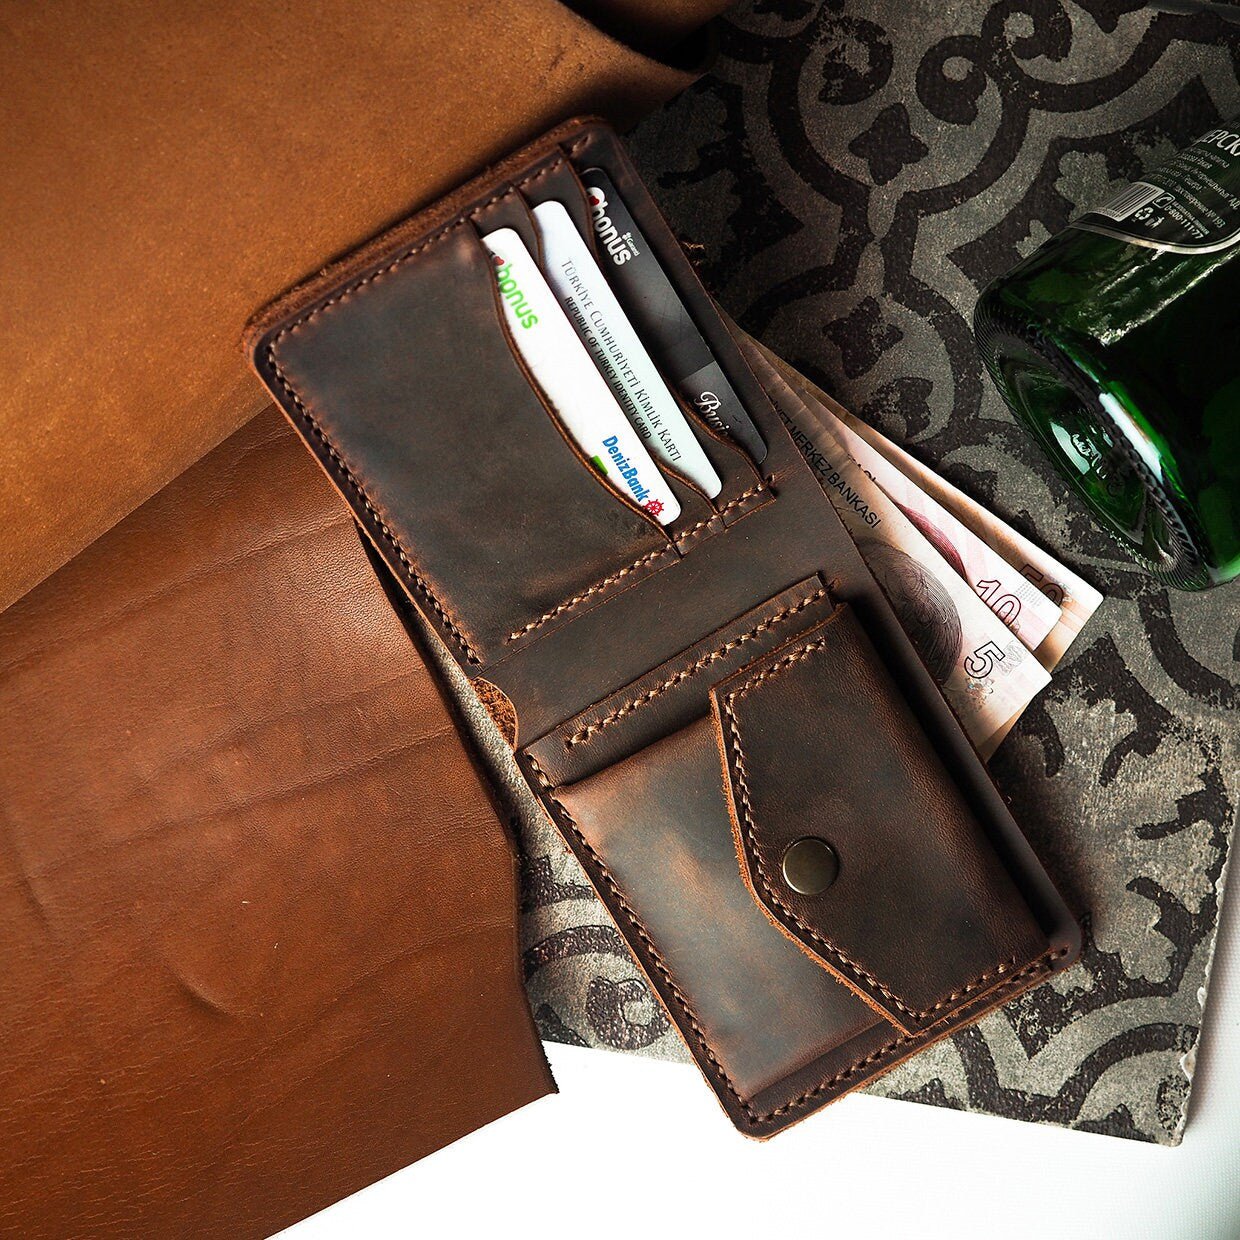 Unique LEATHER Tobacco Pouch - Model Leather 5 in Brown